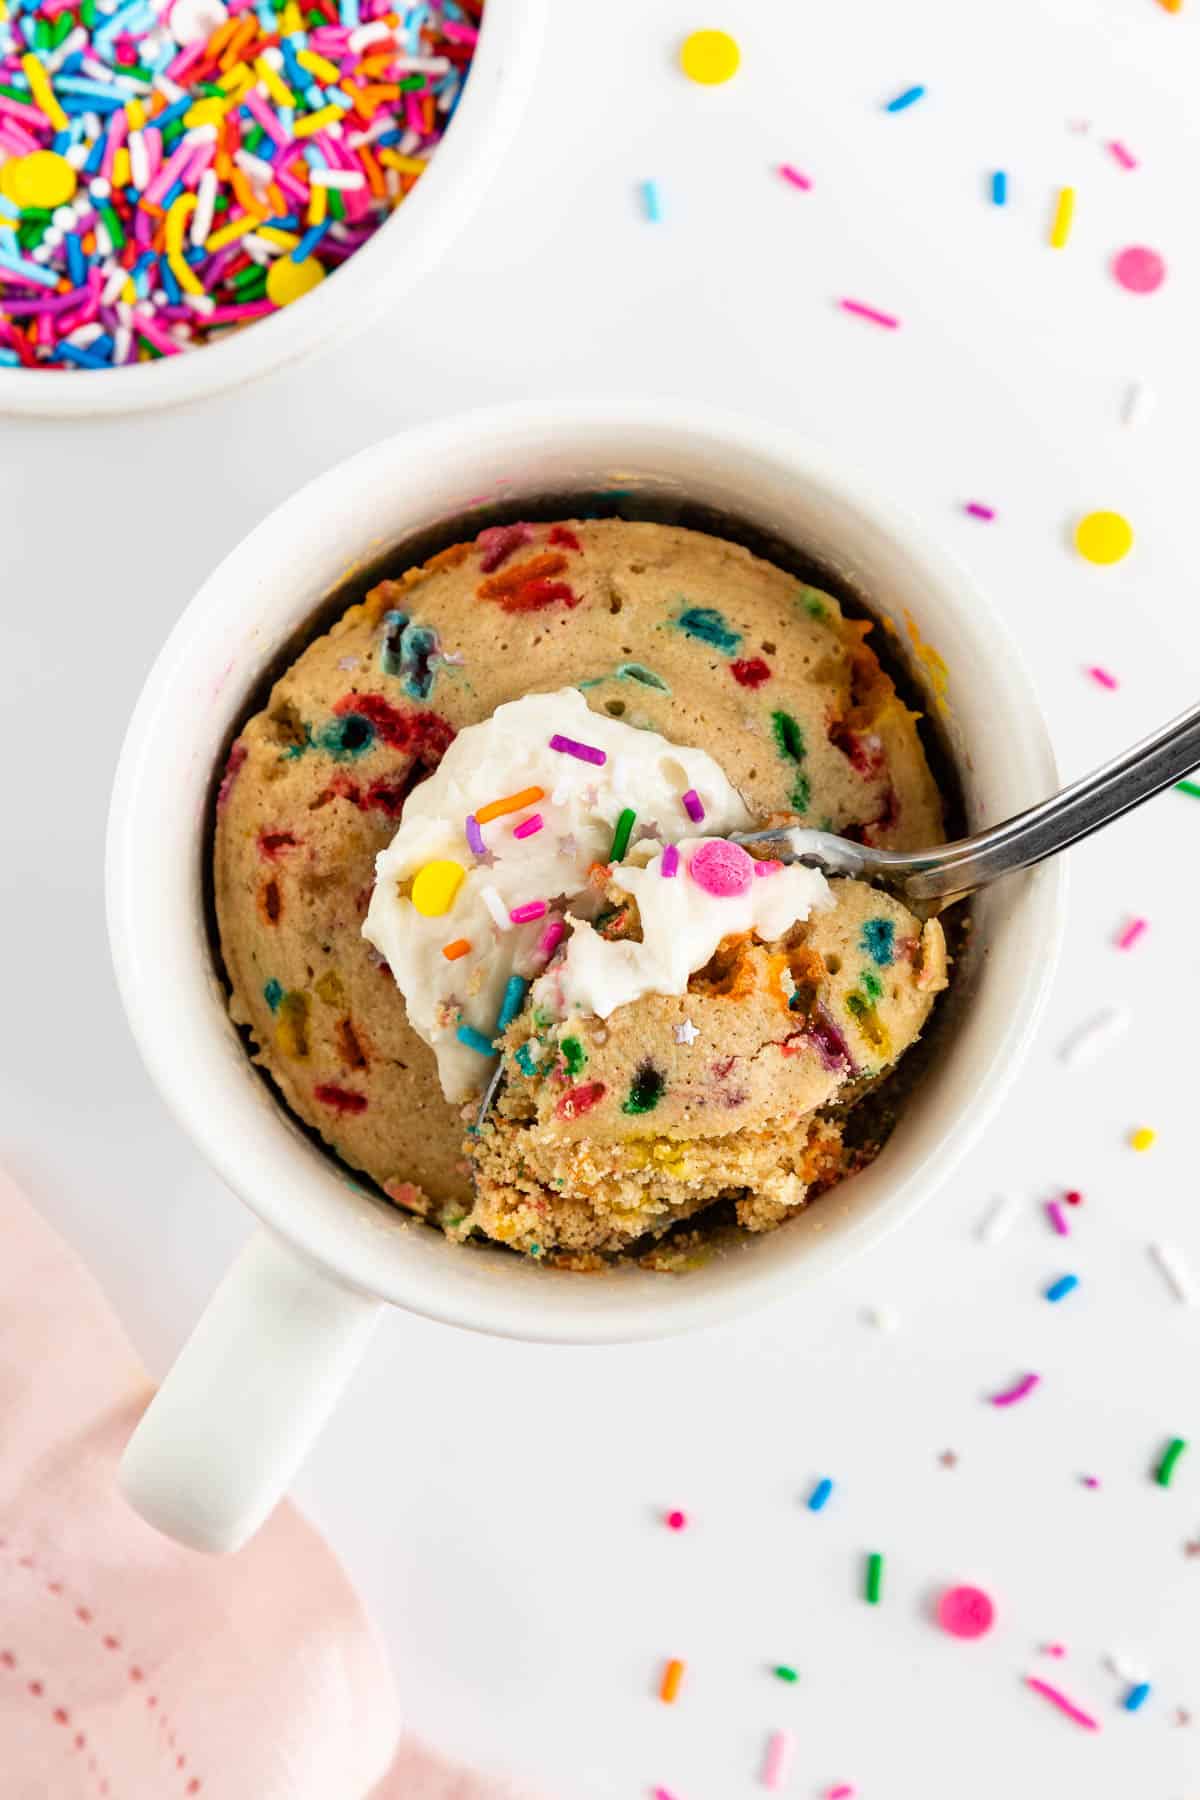 a spoon scooping into a vegan funfetti mug cake with rainbow sprinkles and vanilla frosting